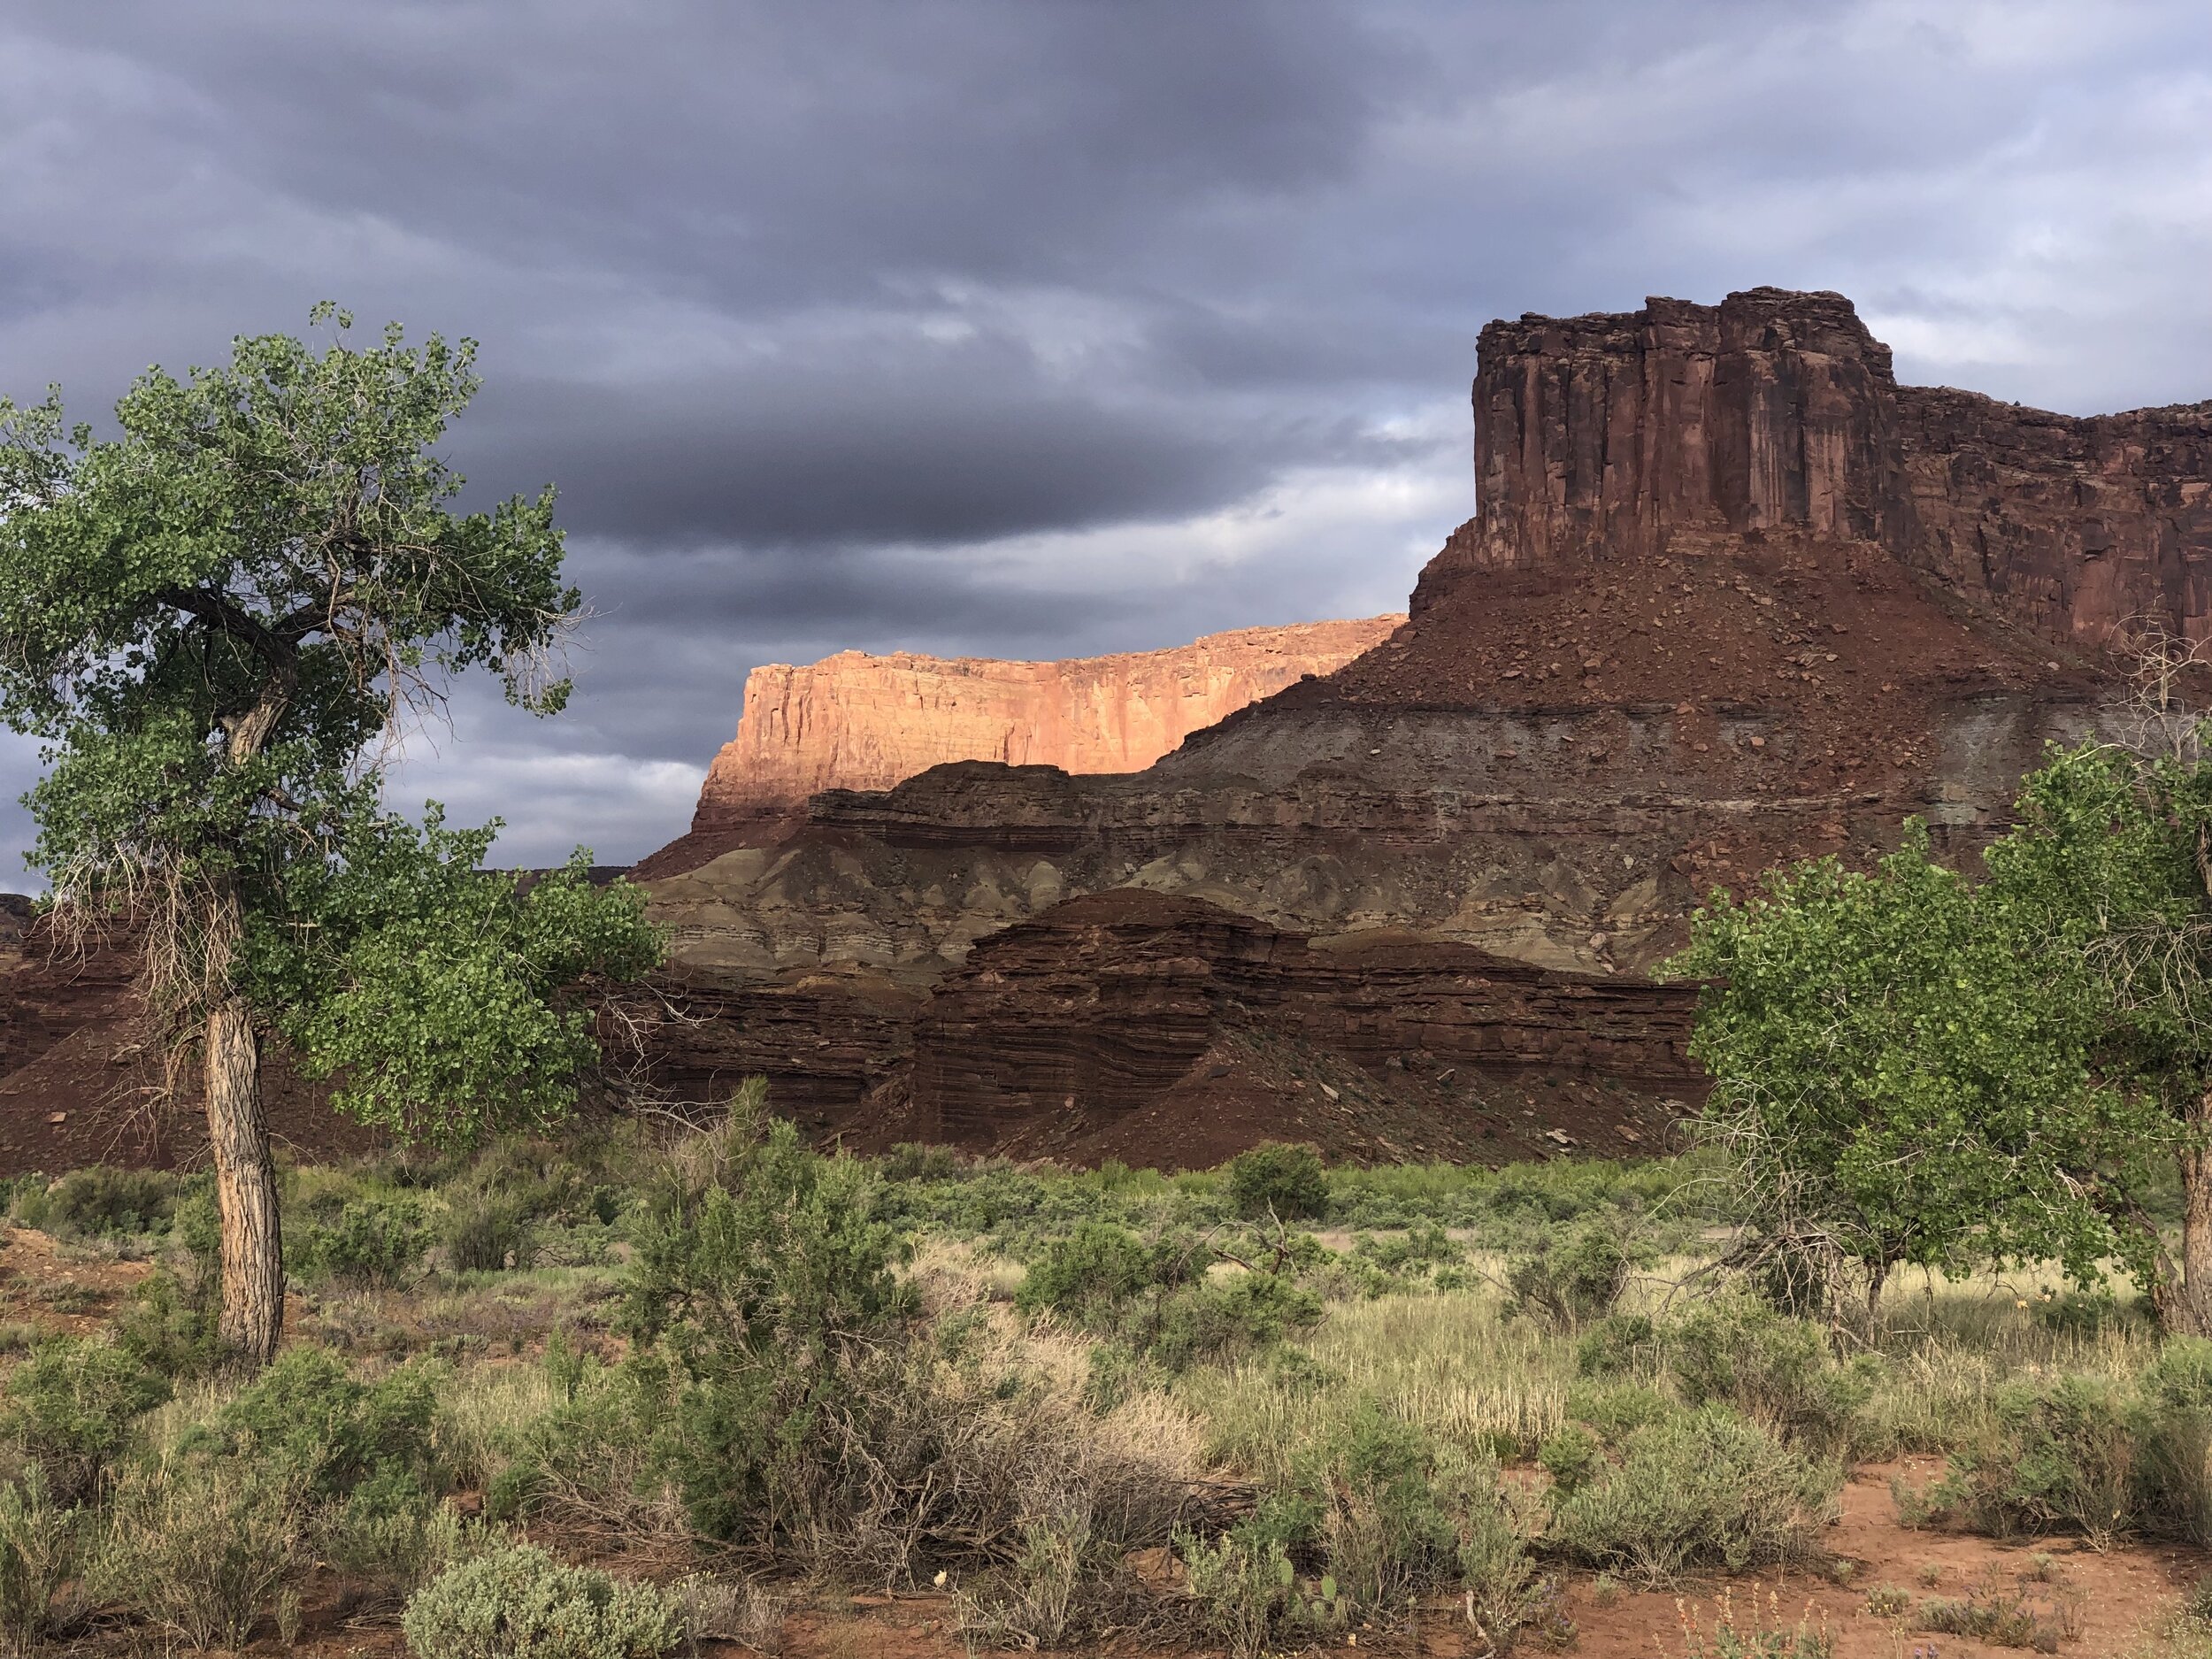 Another pic from driving the white rim trail in Canyonlands.